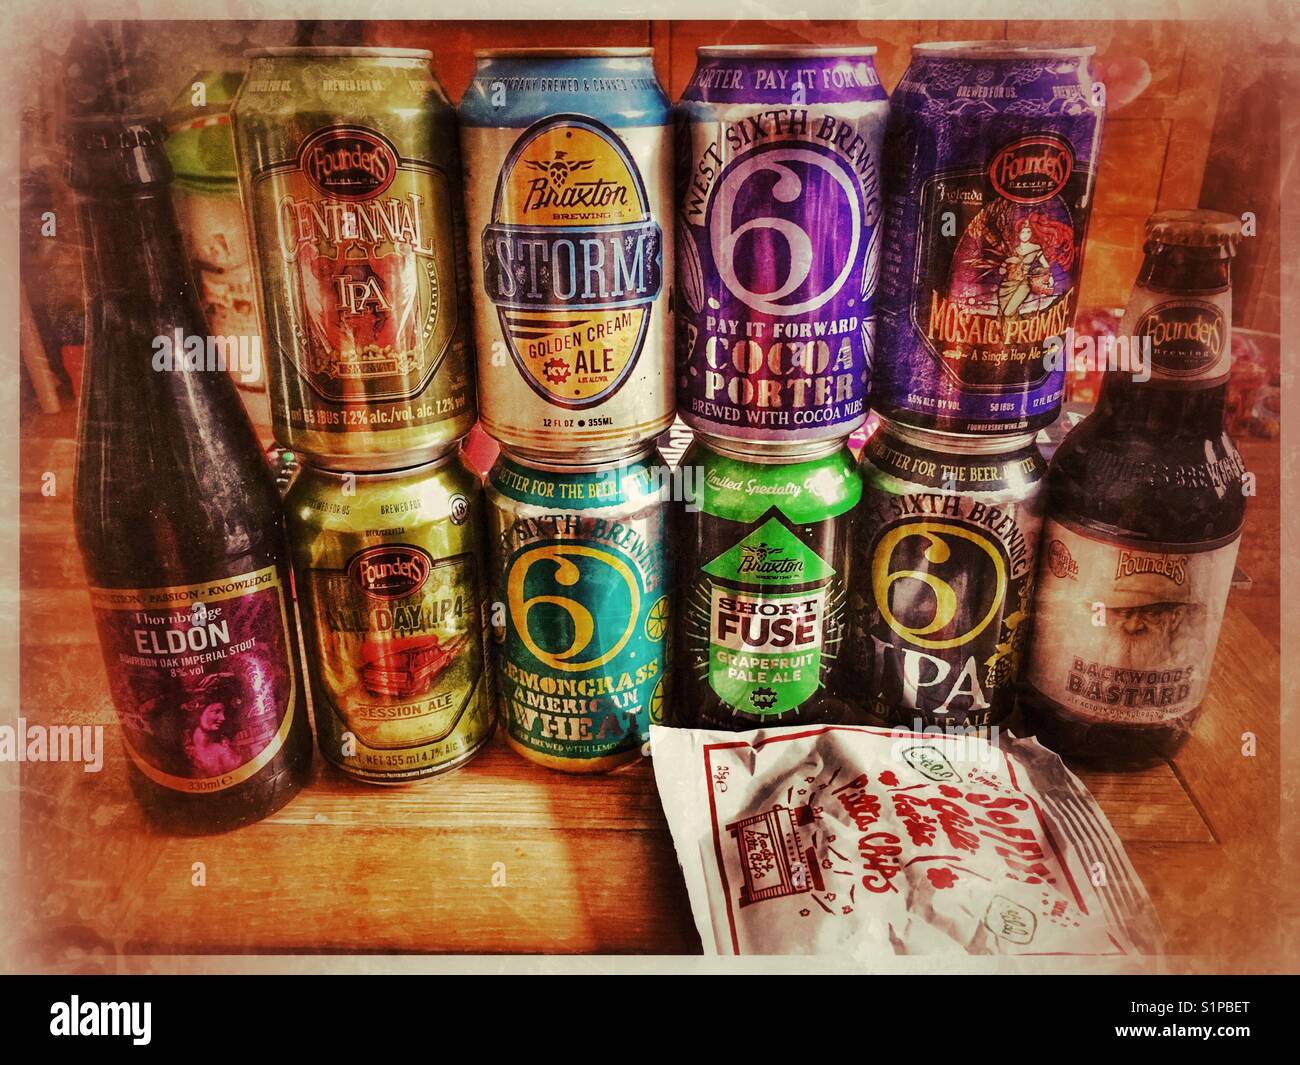 A selection of craft beers from Kentucky, USA. Stock Photo